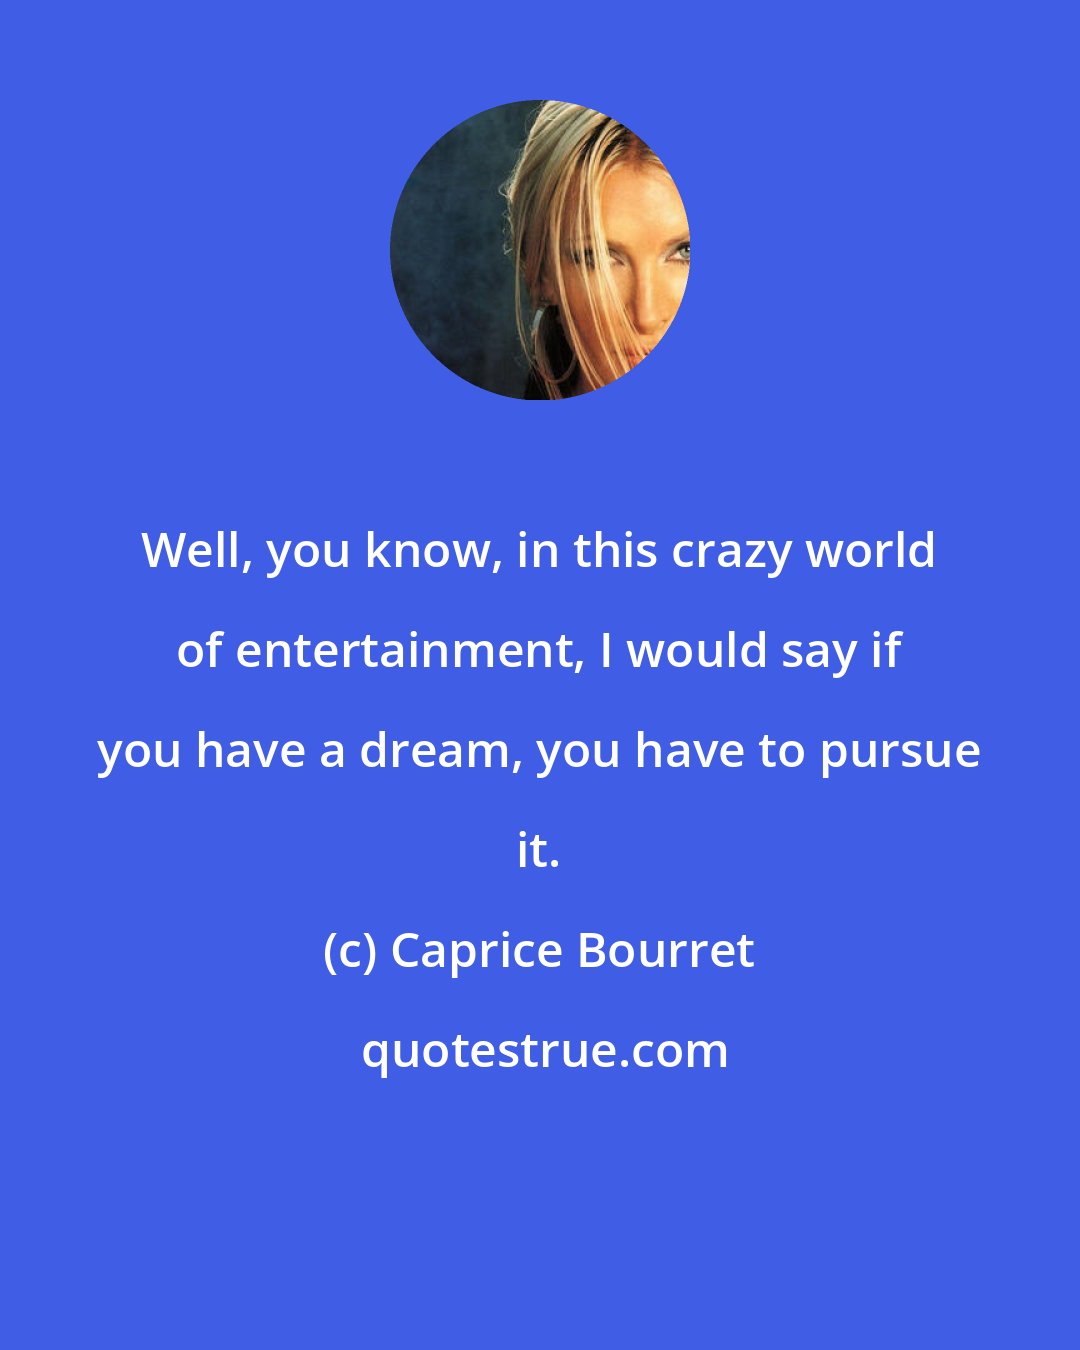 Caprice Bourret: Well, you know, in this crazy world of entertainment, I would say if you have a dream, you have to pursue it.